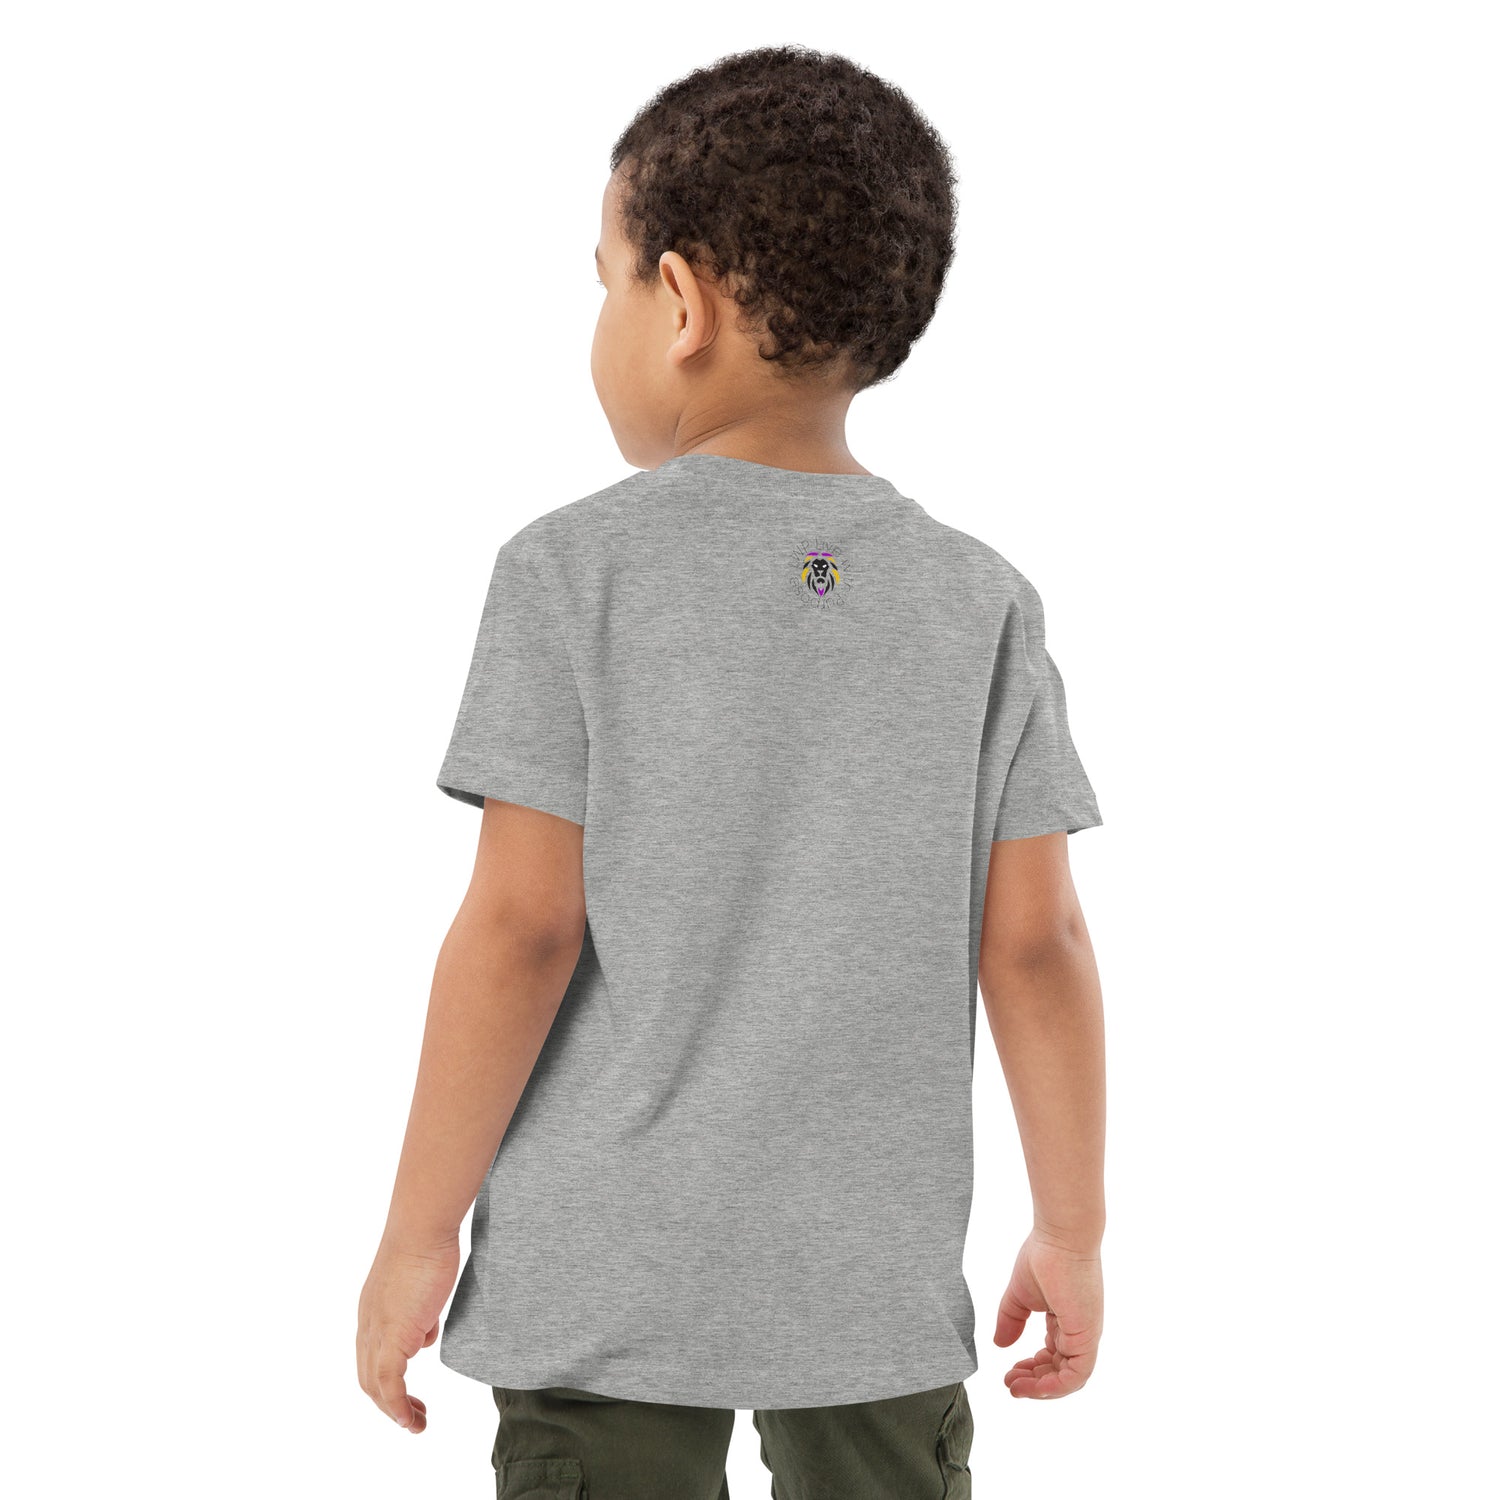 Organic cotton kids t-shirt - Home of the brave